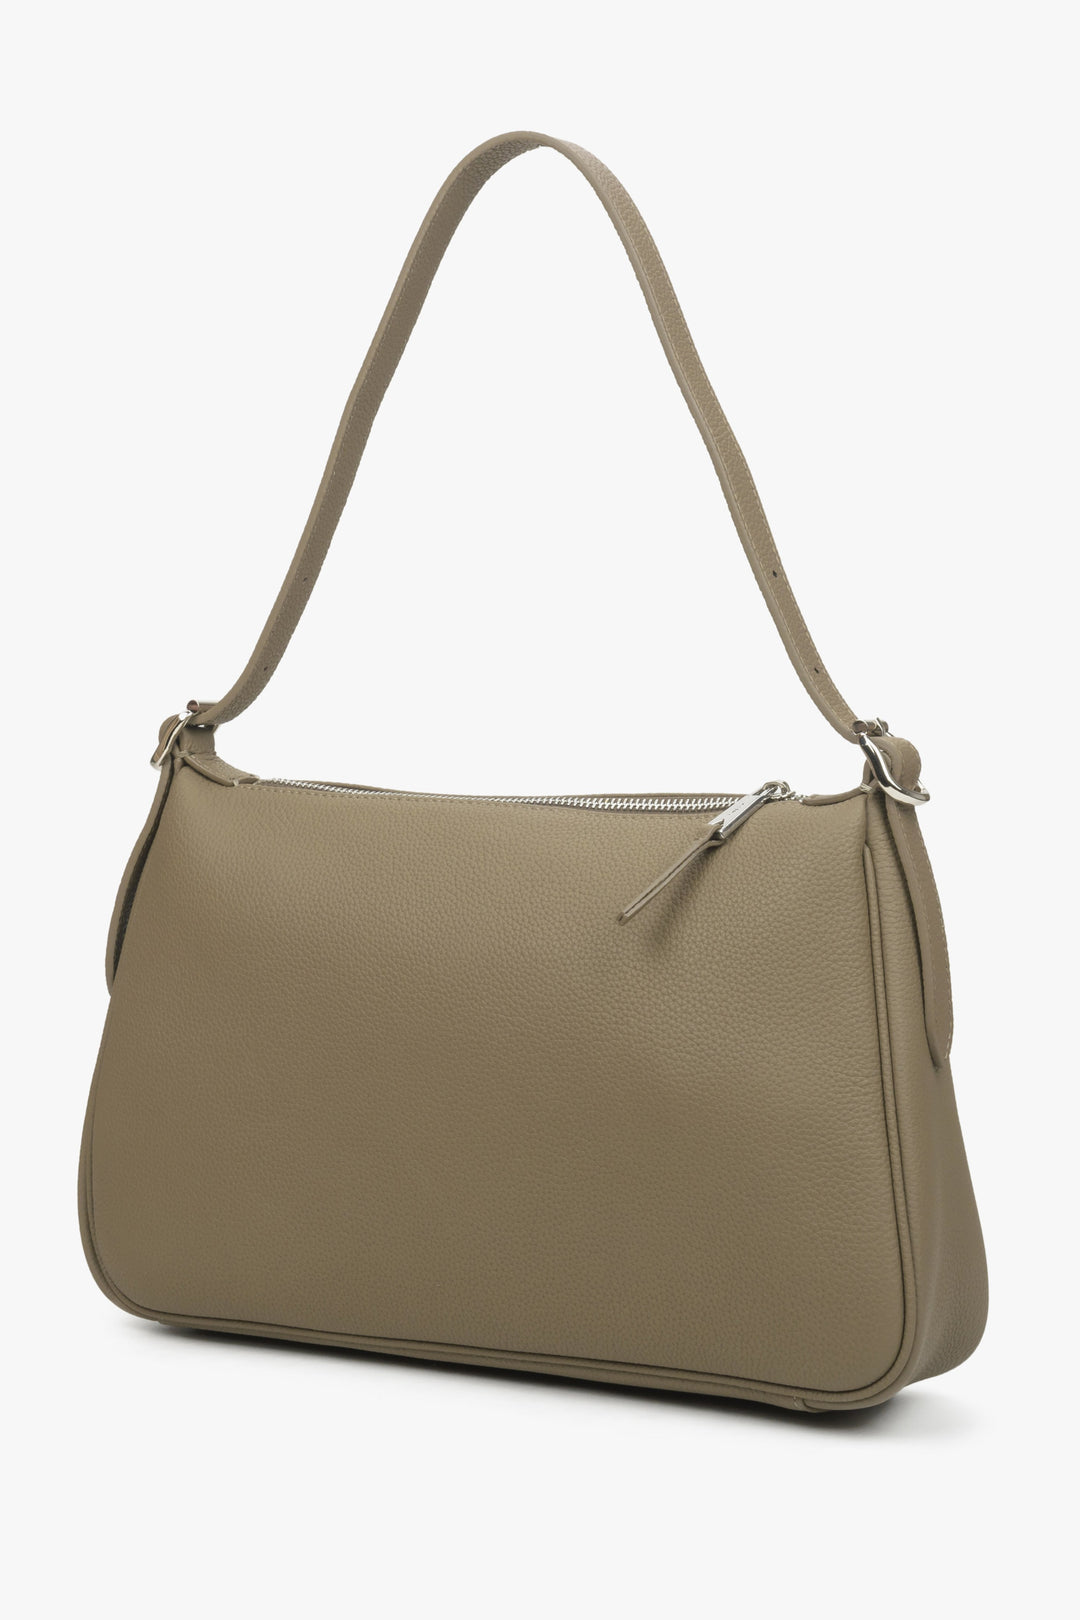 Women's shoulder bag made of genuine leather, in a beige-grey colour.